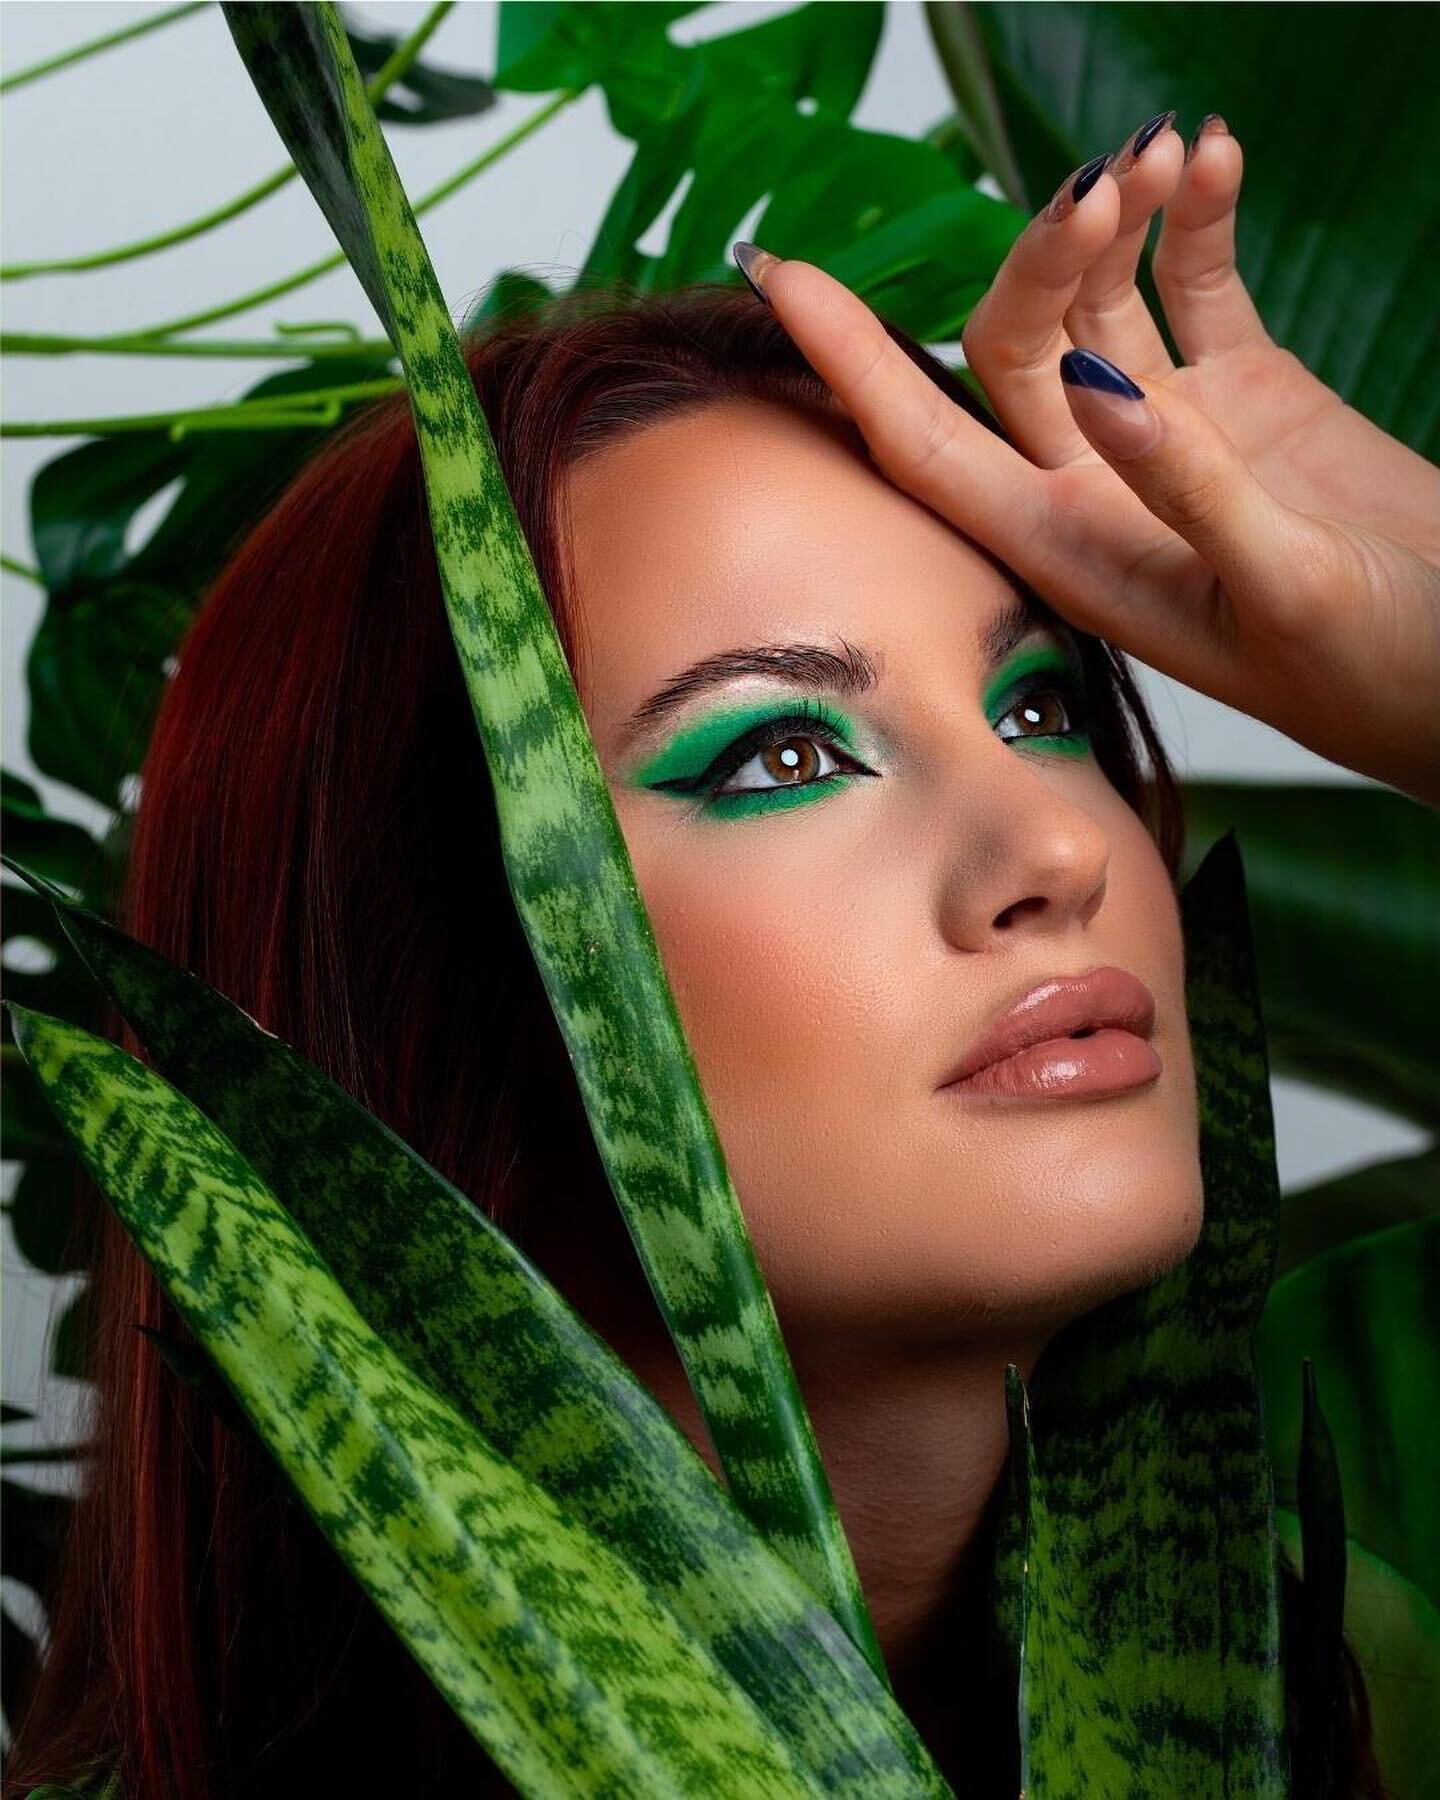 Color Series Final Part 4: Green with @bossbeautymakeupacademy 🌈🎨
 

For the prop we had a variety of plants. Loved the makeup on @ryleehope all created by @ladyamanibeauty 

✨ @ryleehope 
💄 @ladyamanibeauty 
📍 @bossbeautymakeupacademy 
📸 @pixel